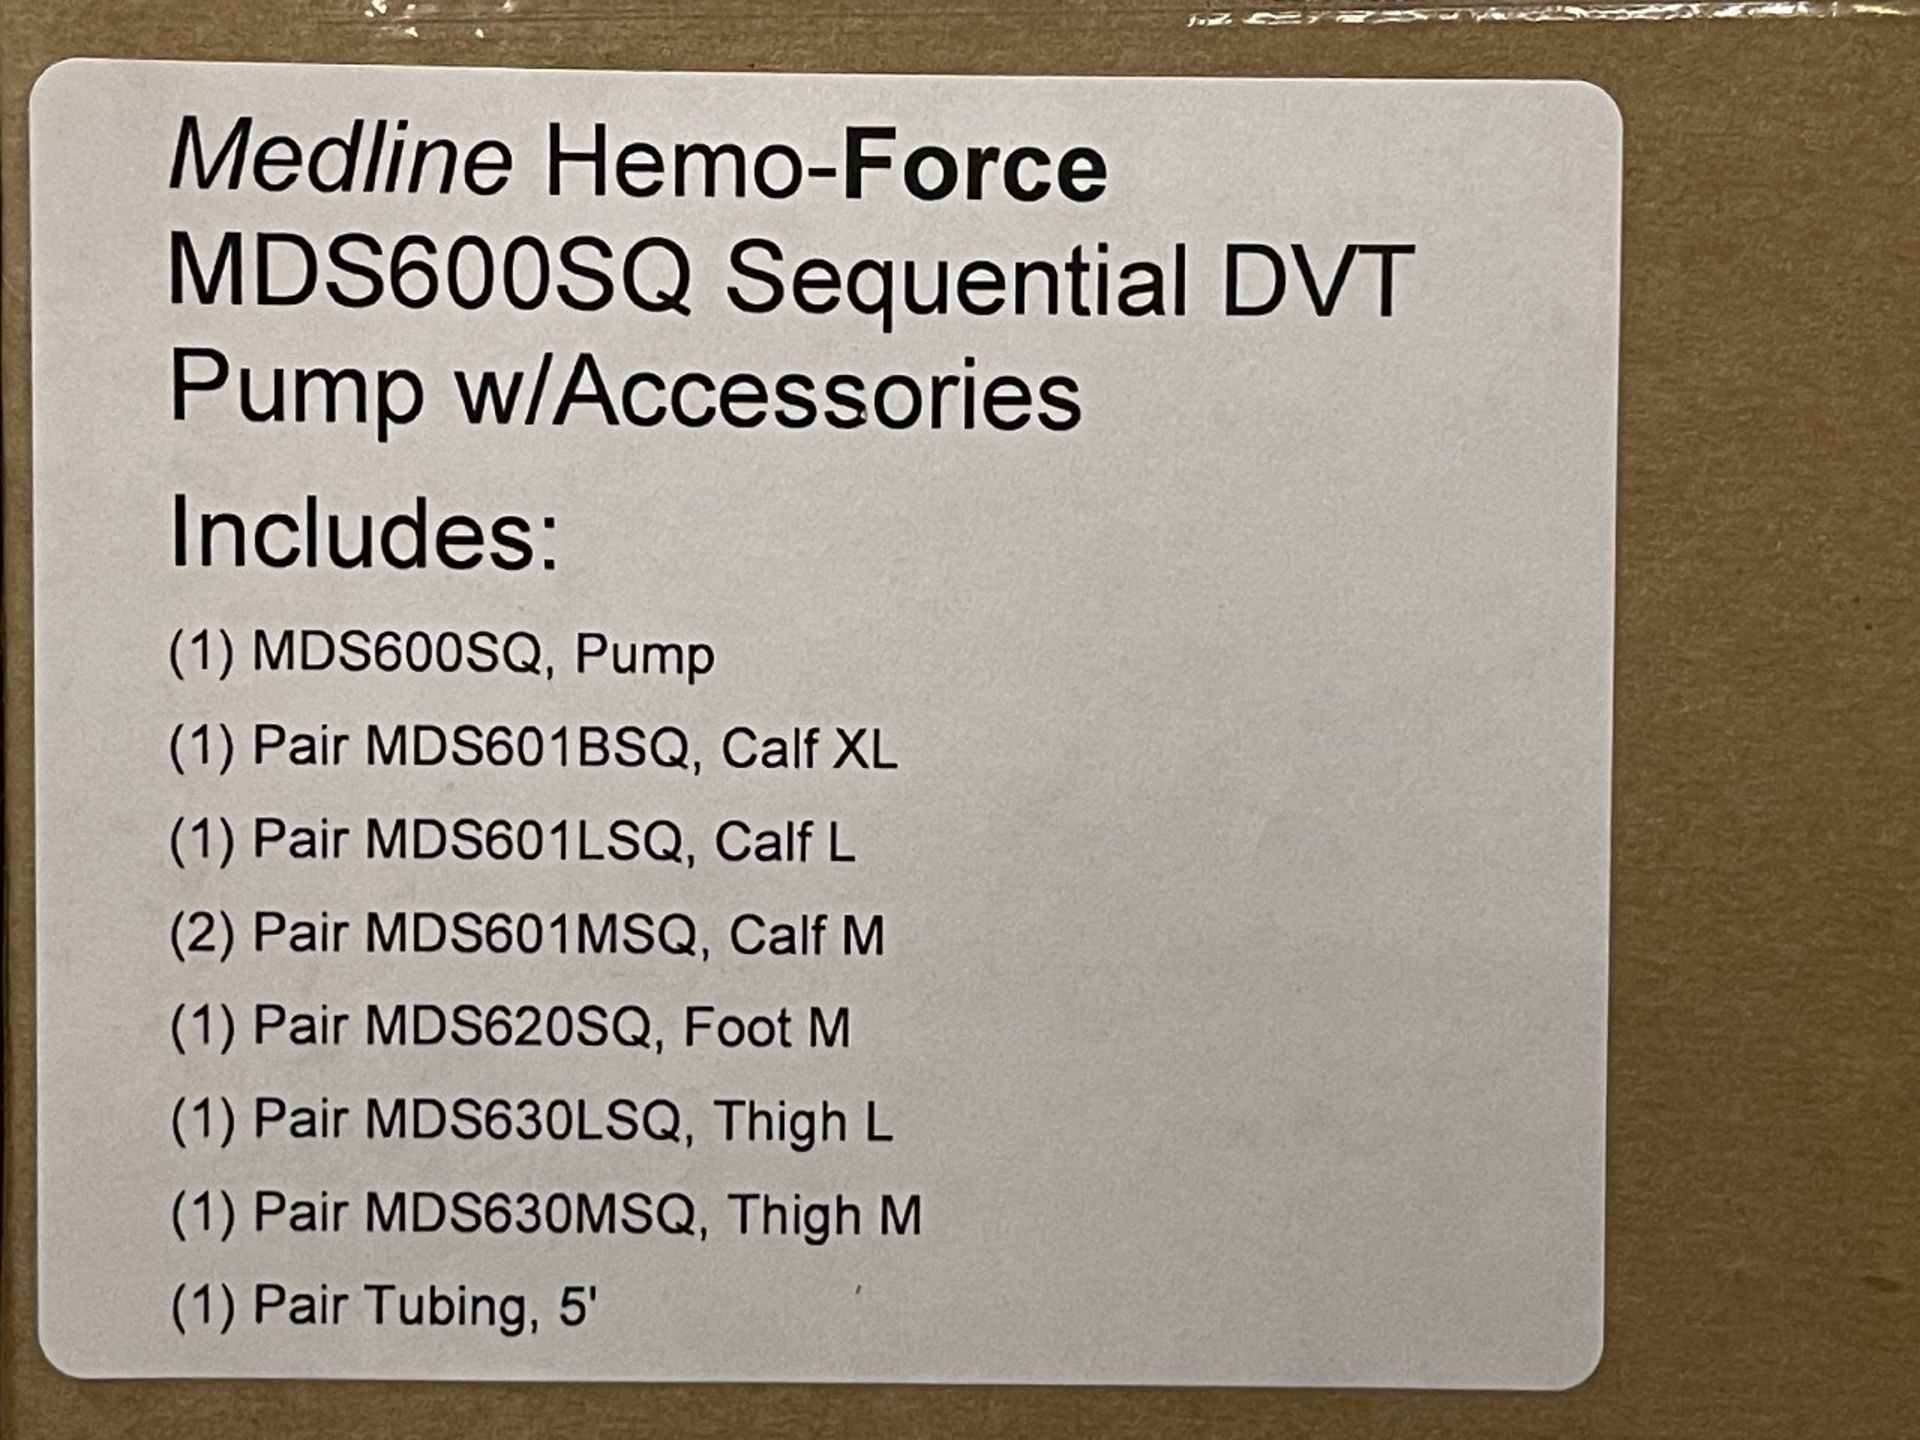 Medline Hemo-Force MDS600SQ Sequential DVT Pumps w/Accessories - Image 3 of 3